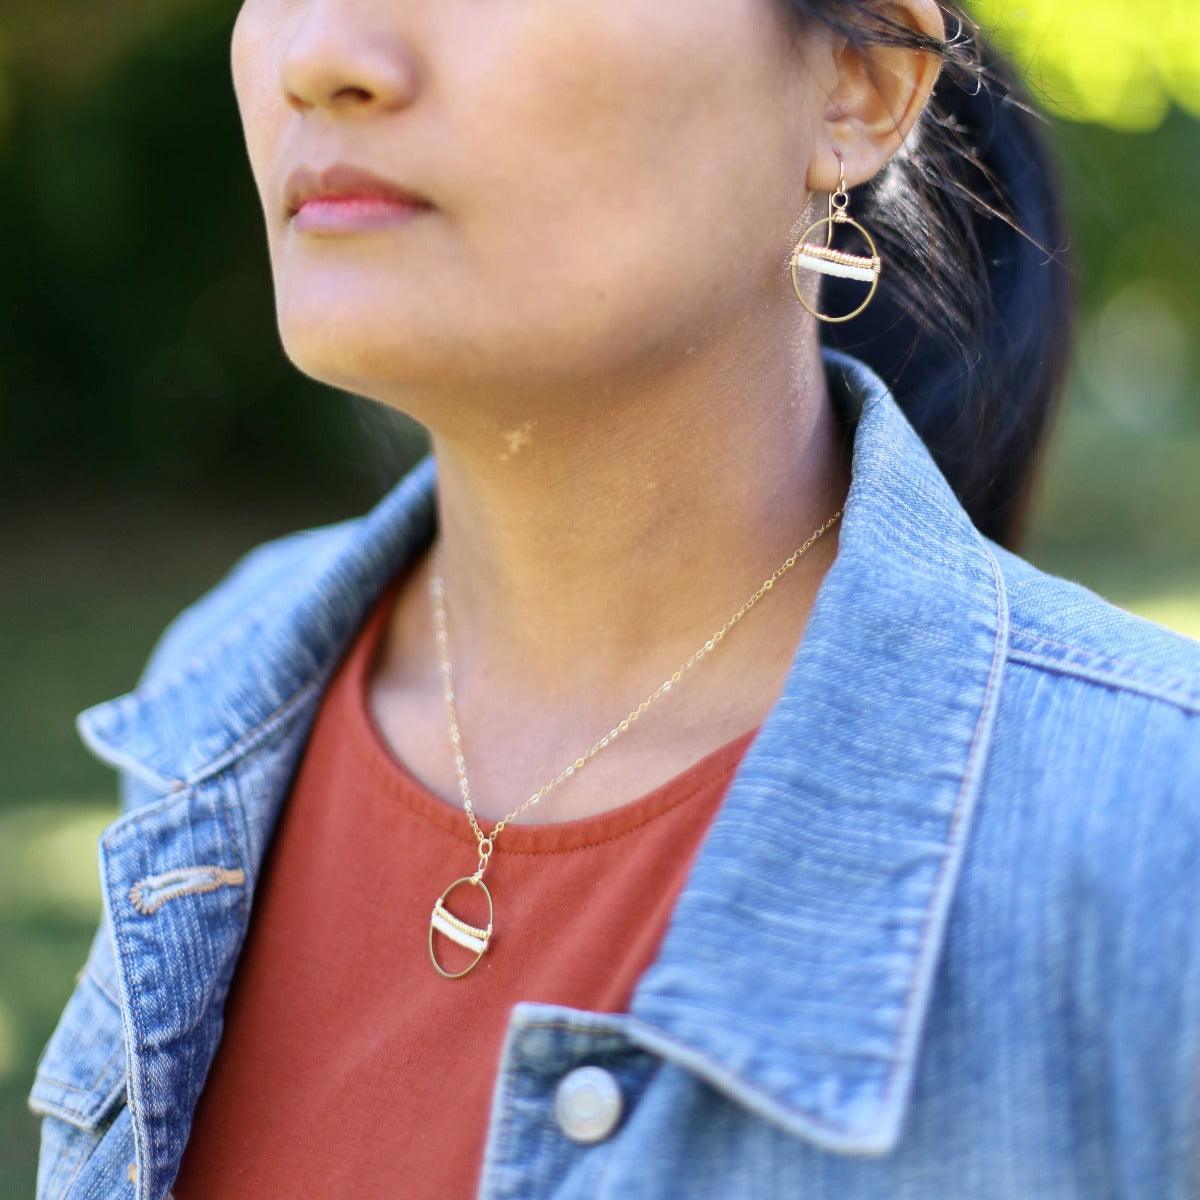 Inspired by the seeds of hope brought by our newest artisans from Afghanistan, this necklace will remind you of the hope available for all of us. Encircled by a hoop of gold-fill wire, cream and white seeds are held in perfect tension. Refugee made gifts. Fashion for good.